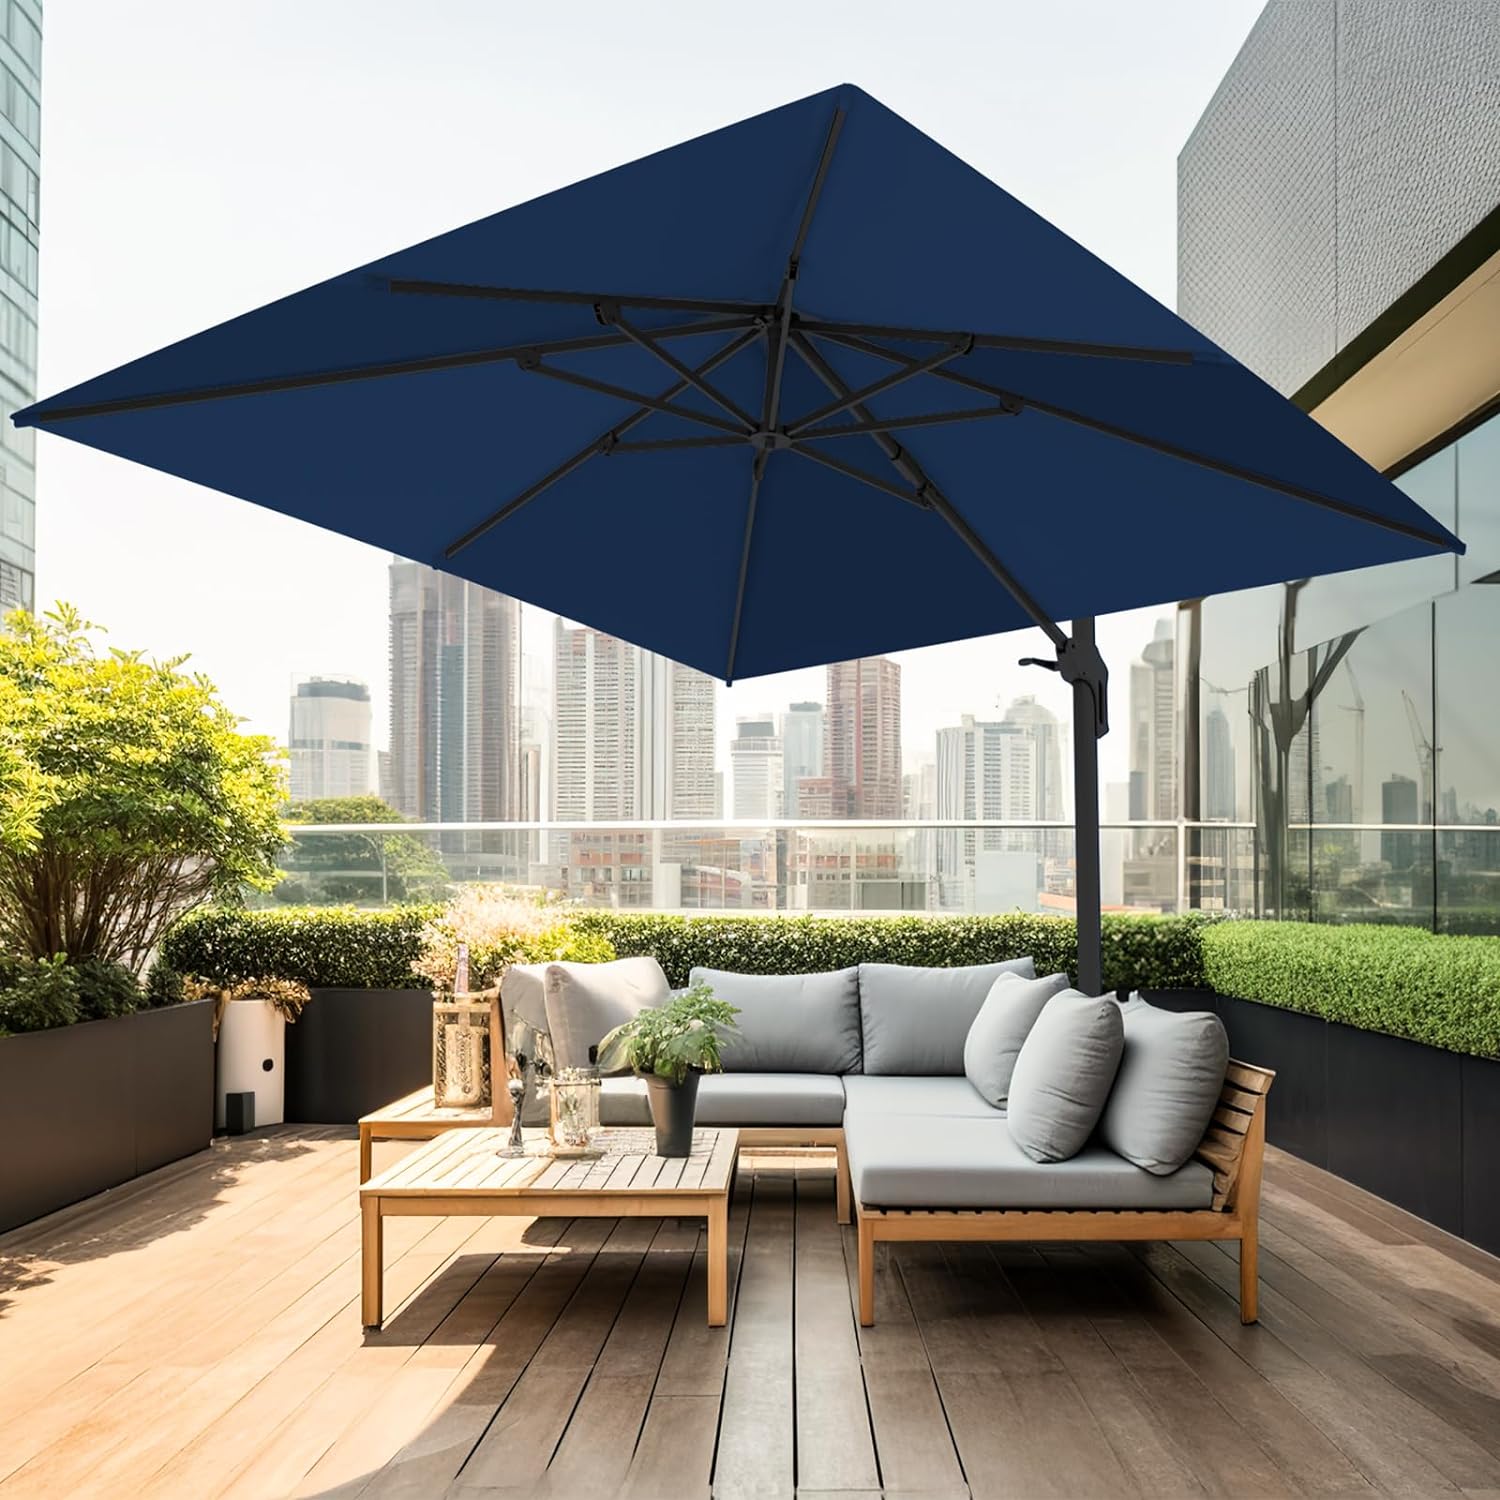 wikiwiki 11x11 FT Cantilever Patio Umbrella Outdoor Offset Square Umbrella w/ 36 Month Fade Resistance Recycled Fabric, 6-Level 360Rotation Aluminum Pole for Deck Pool, Navy Blue